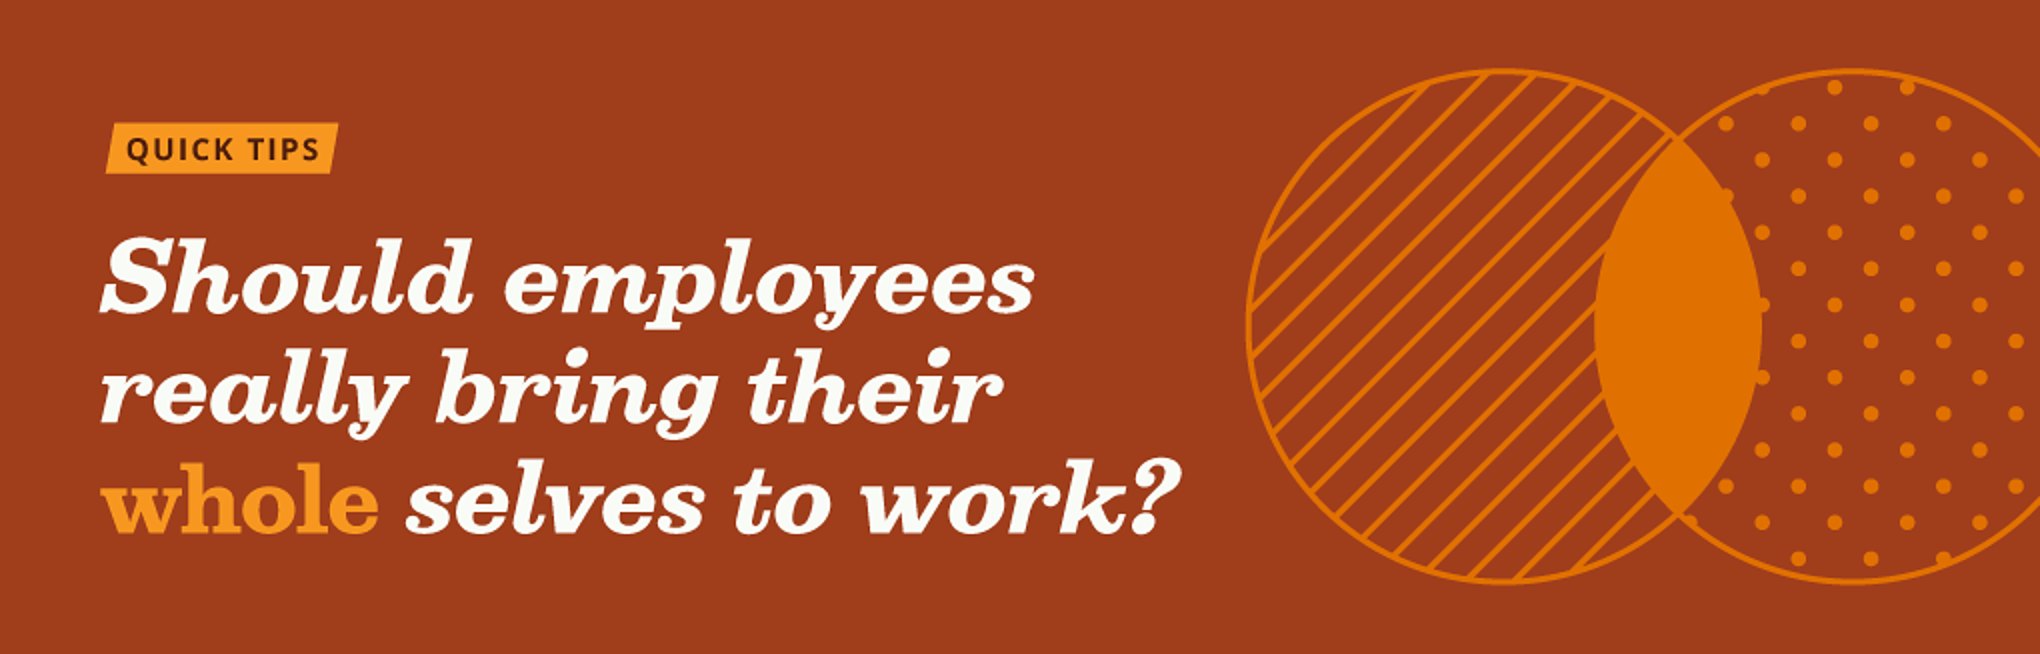 The white and orange text on an orange background reads: "Quick tips: Should employees really bring their whole selves to work?" There is a partial venn diagram on the right side of the graphic, with one stripped circle, one polka dotted circle, and a filled in overlap.